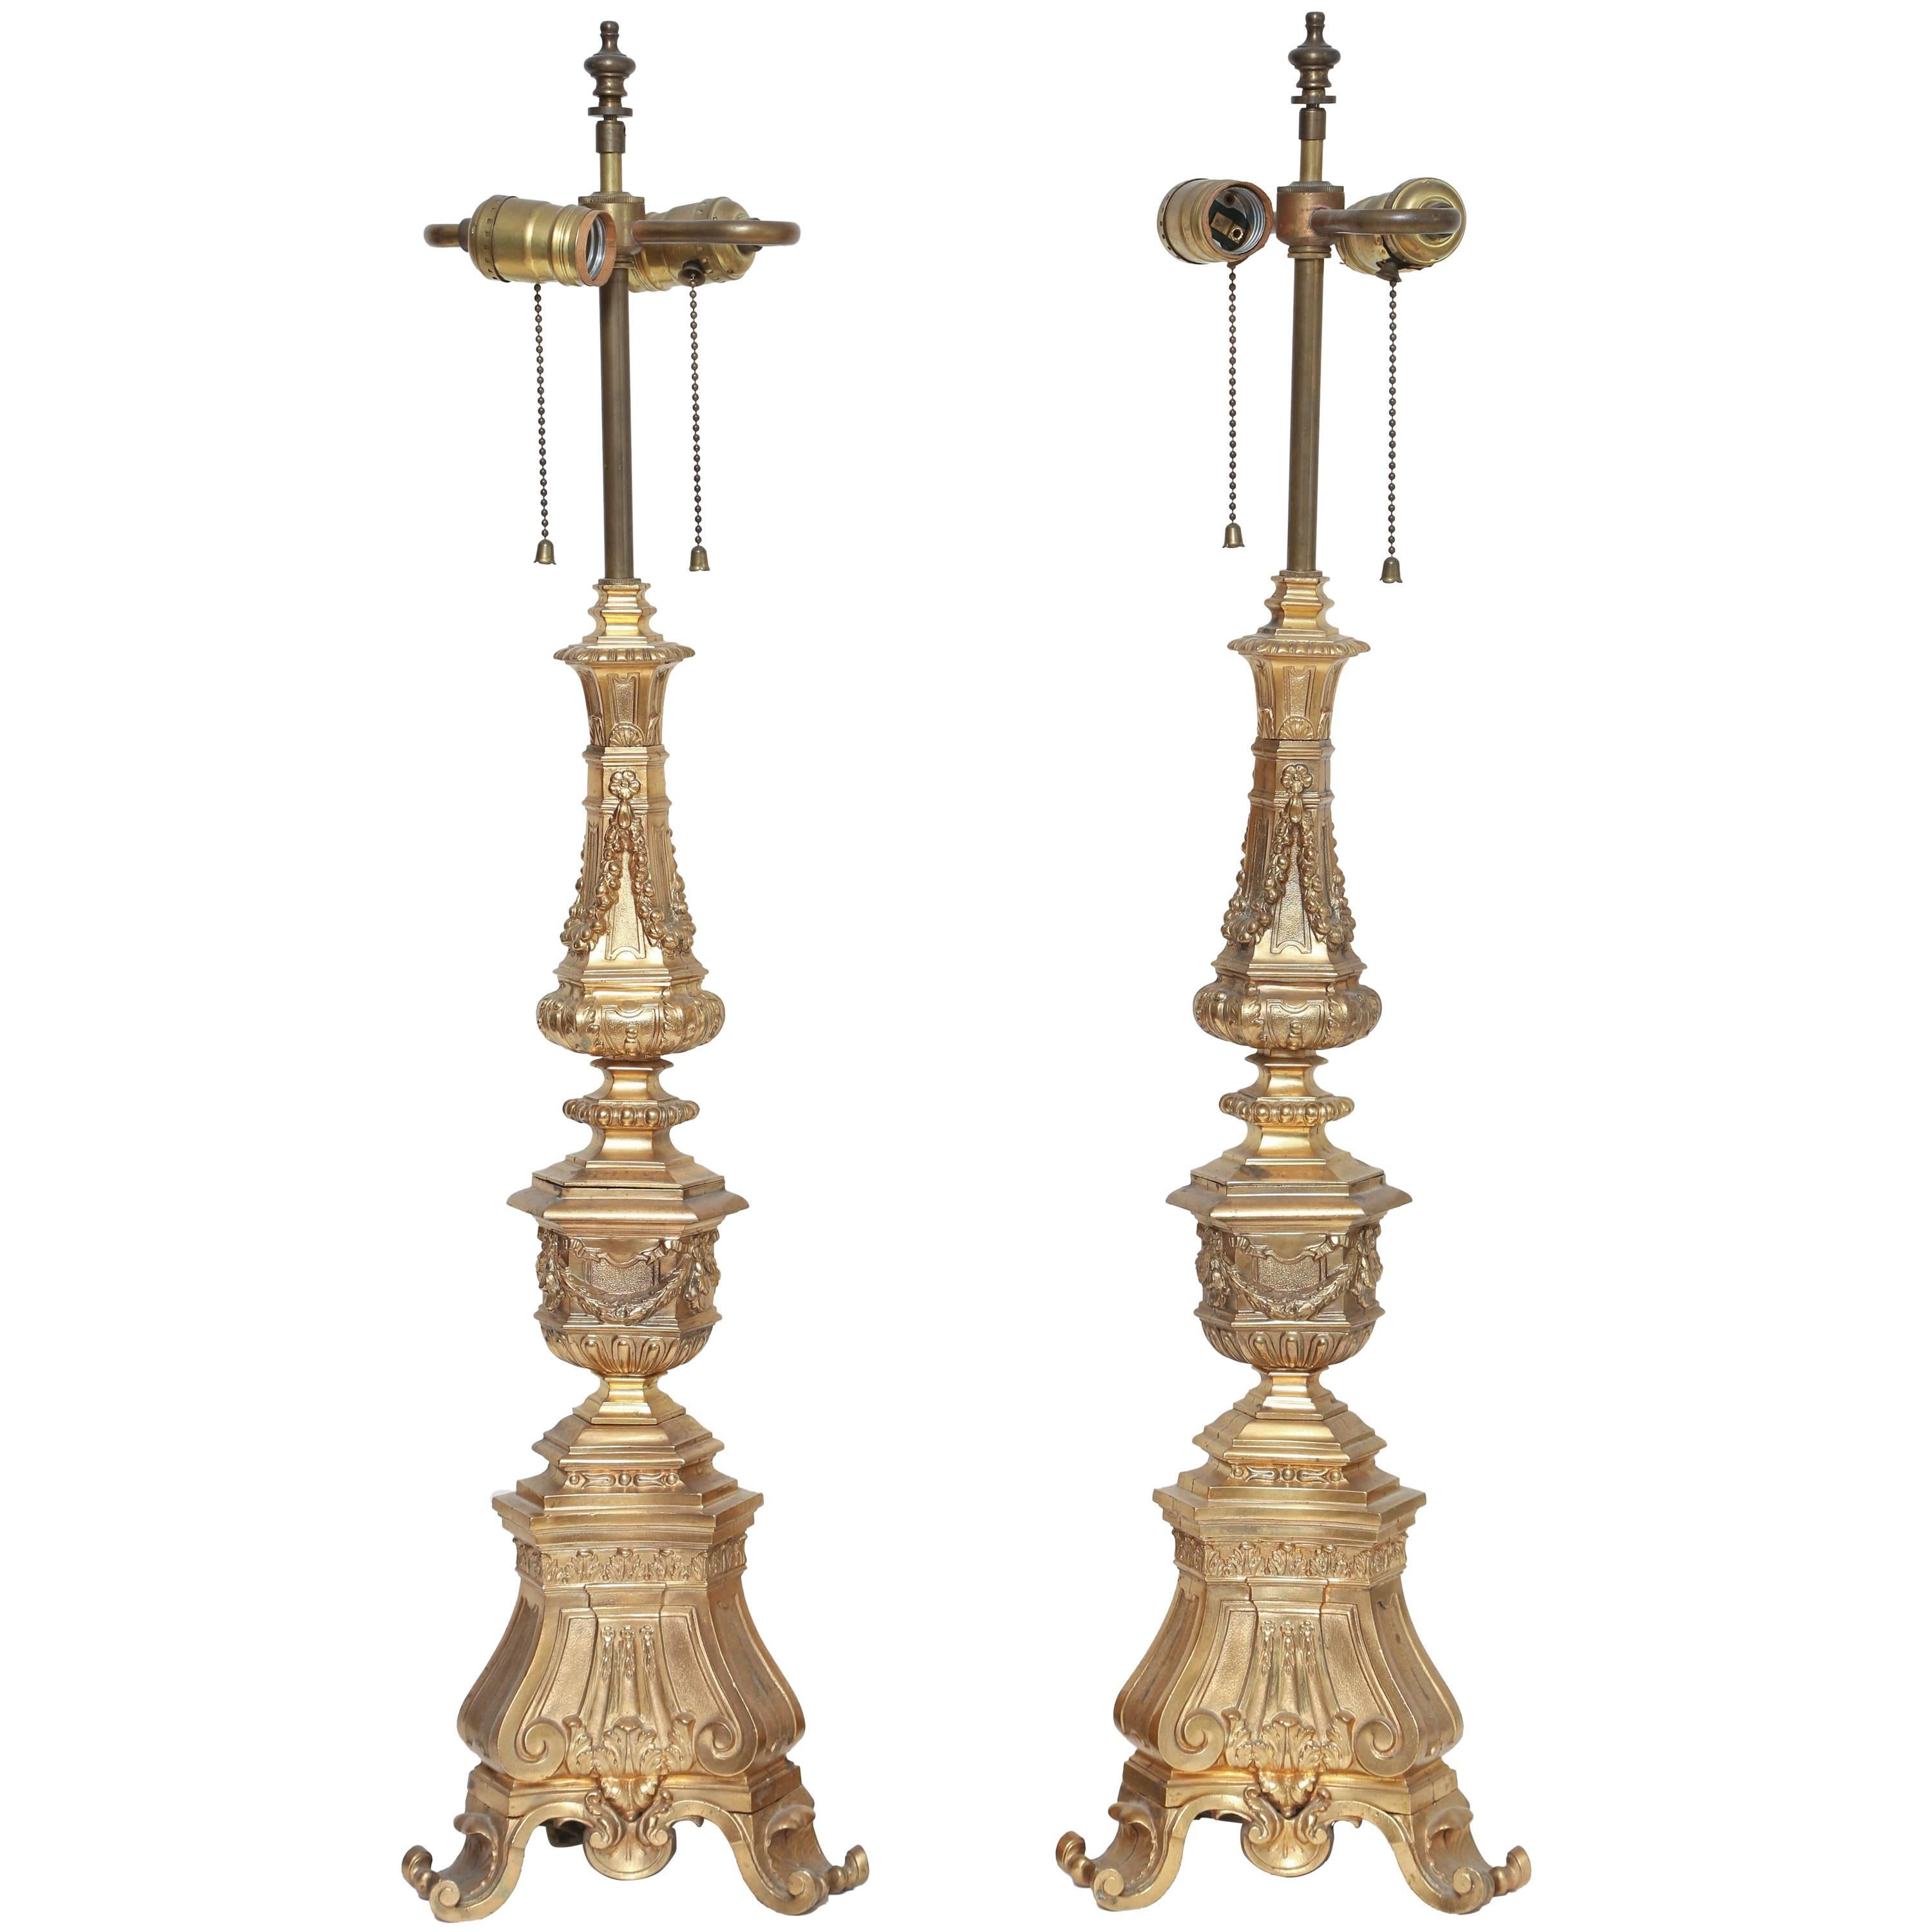 Pair of Monumental Gilt Bronze Tripodal Lamps, First Half of the 20th Century